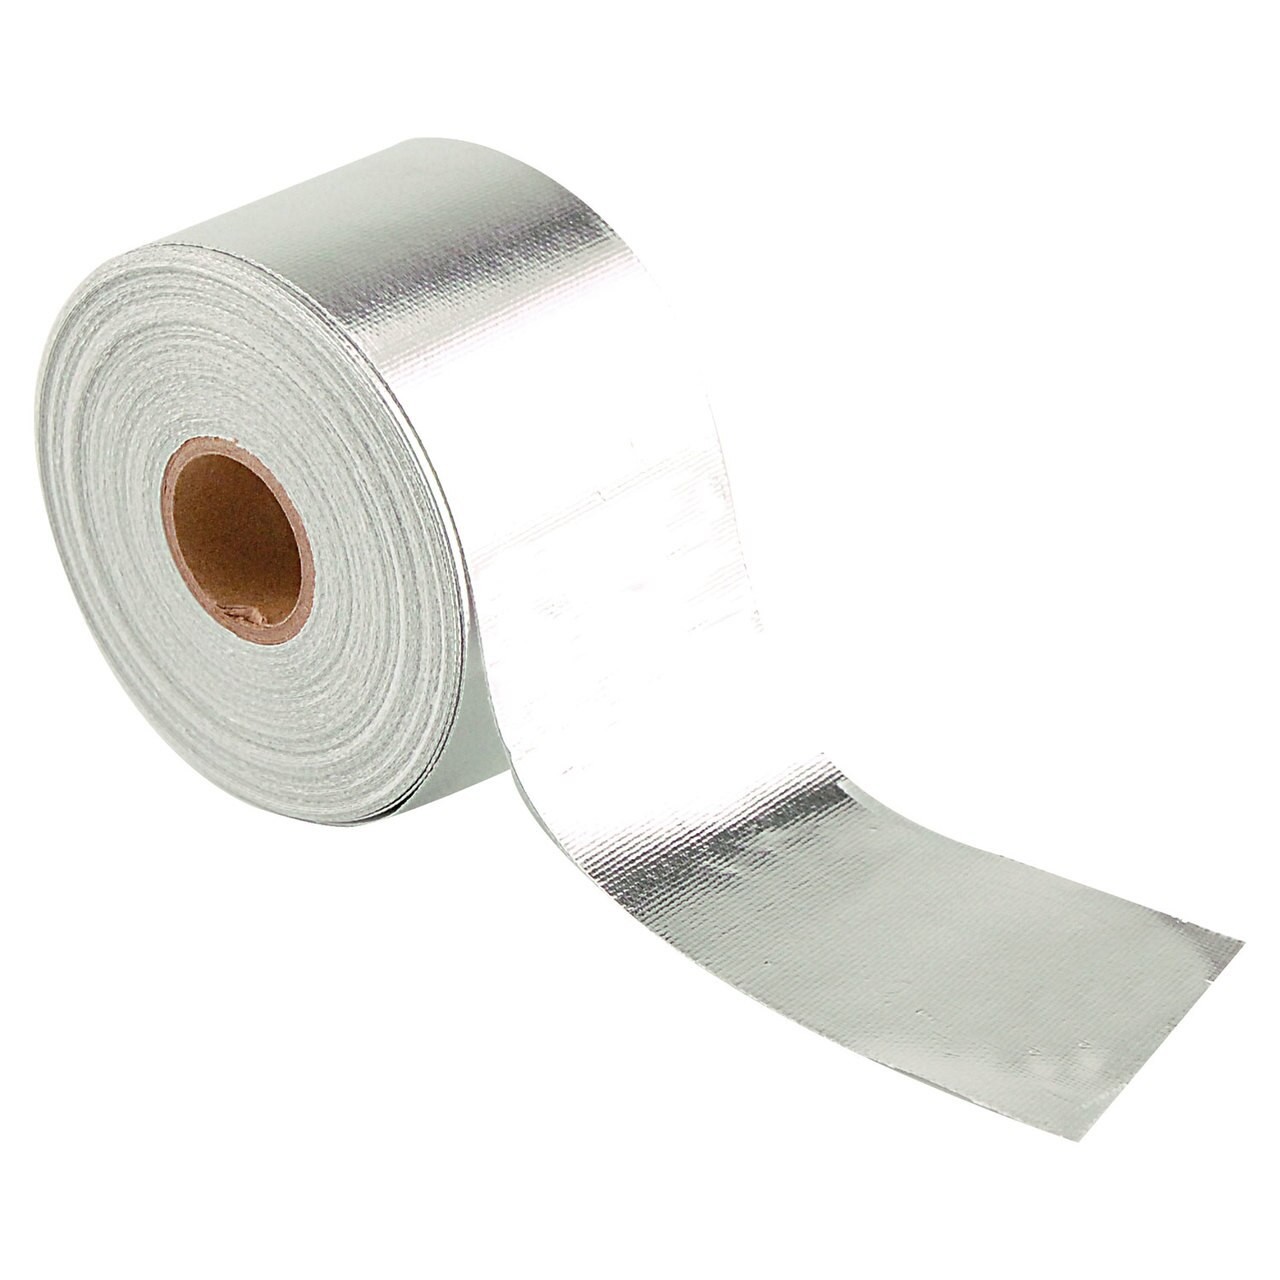 Image of DEI Cool-Tape Plus 2 Inch x 60ft roll - 10413